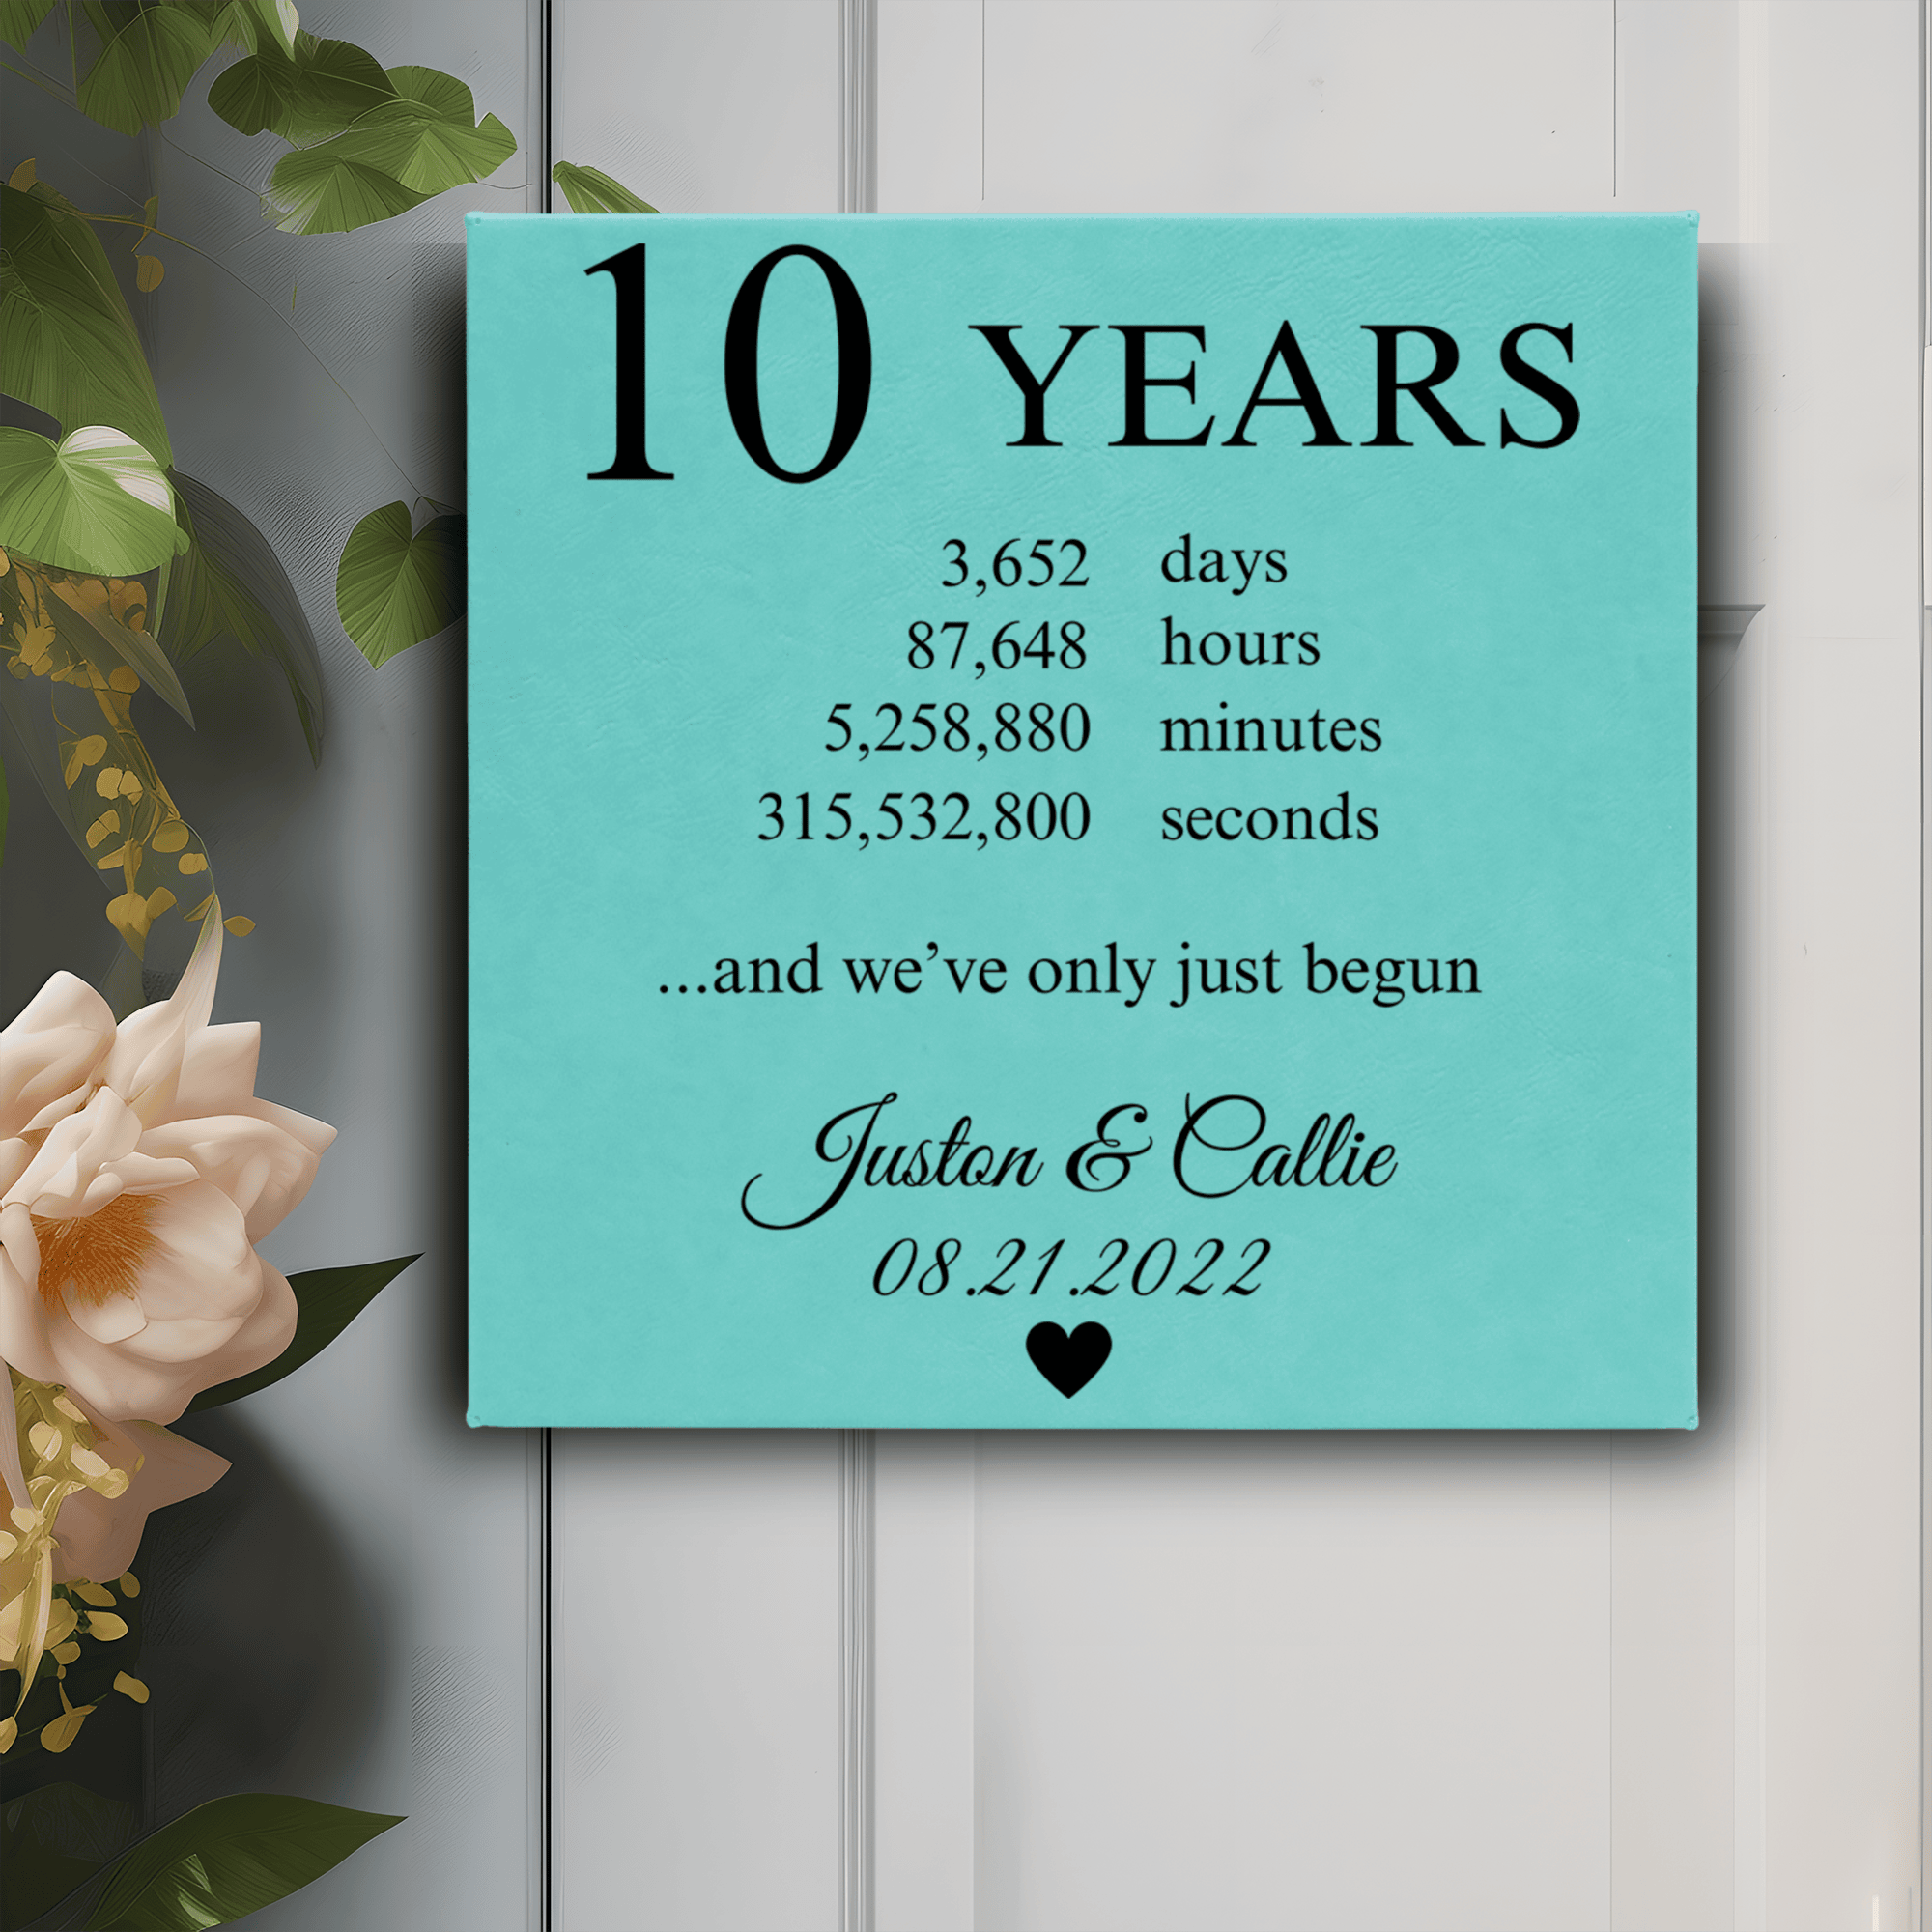 Teal Leather Wall Decor With 10 Year Anniversary Design